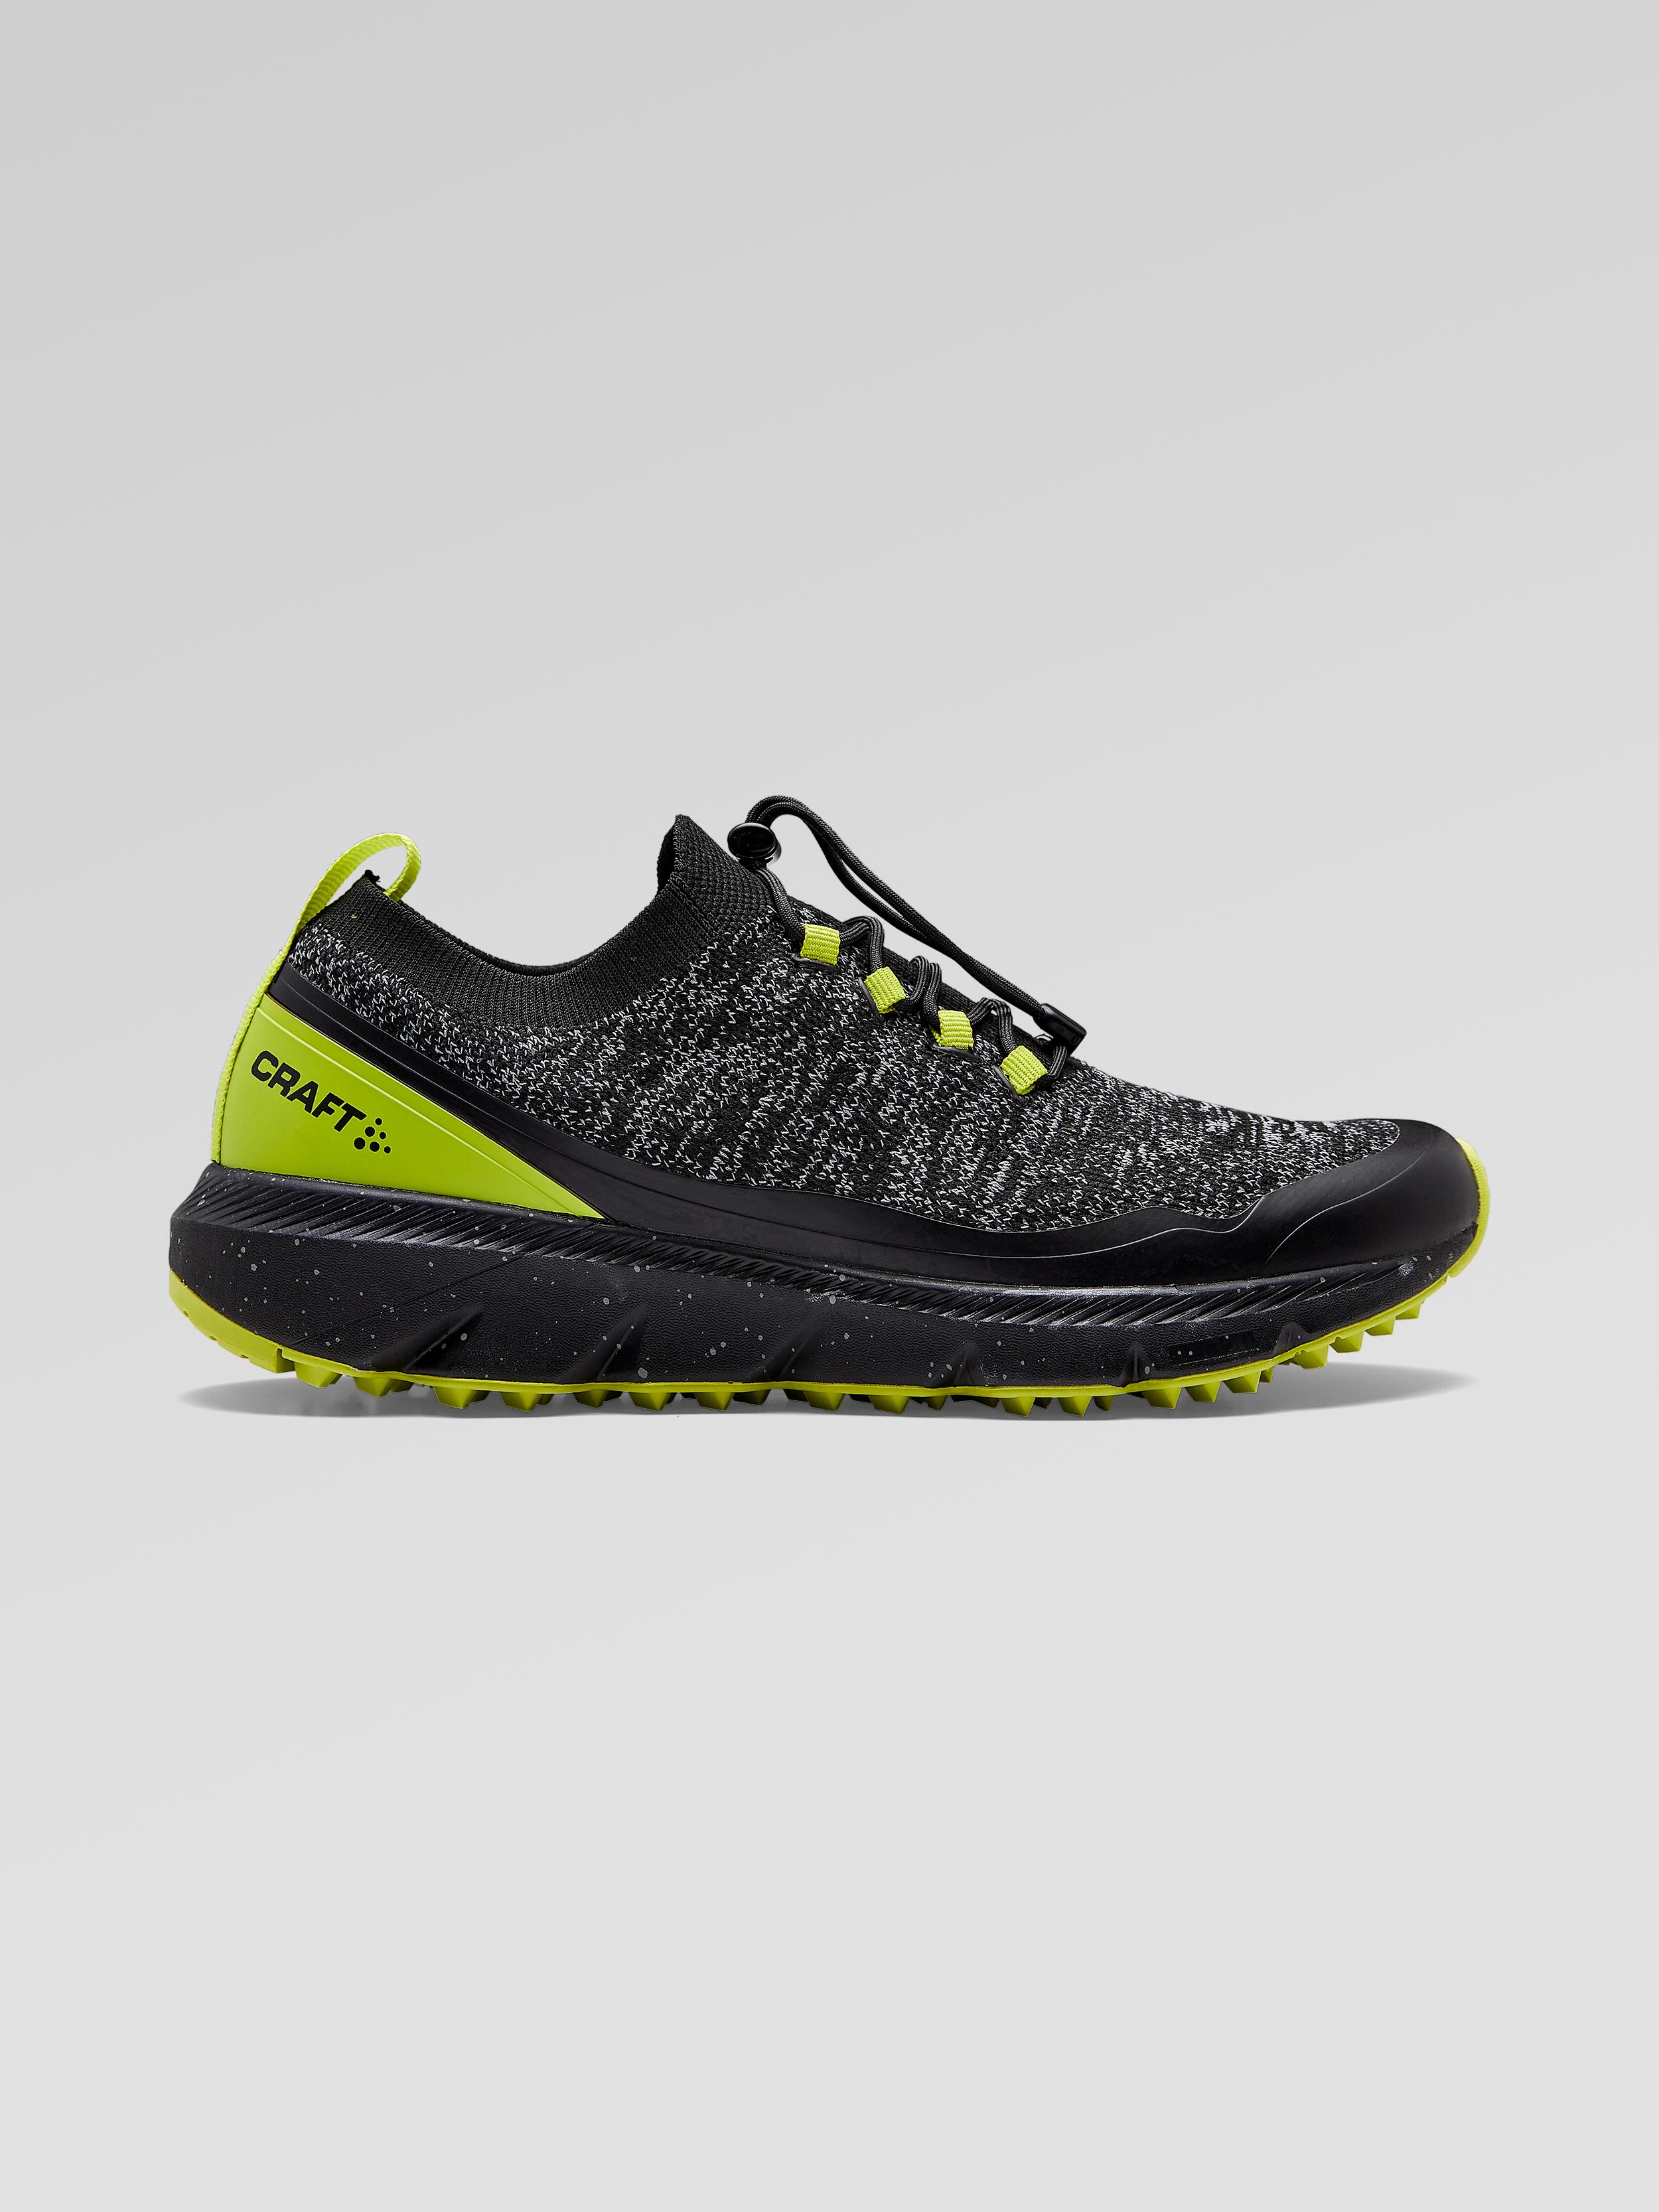 nike ocr shoes